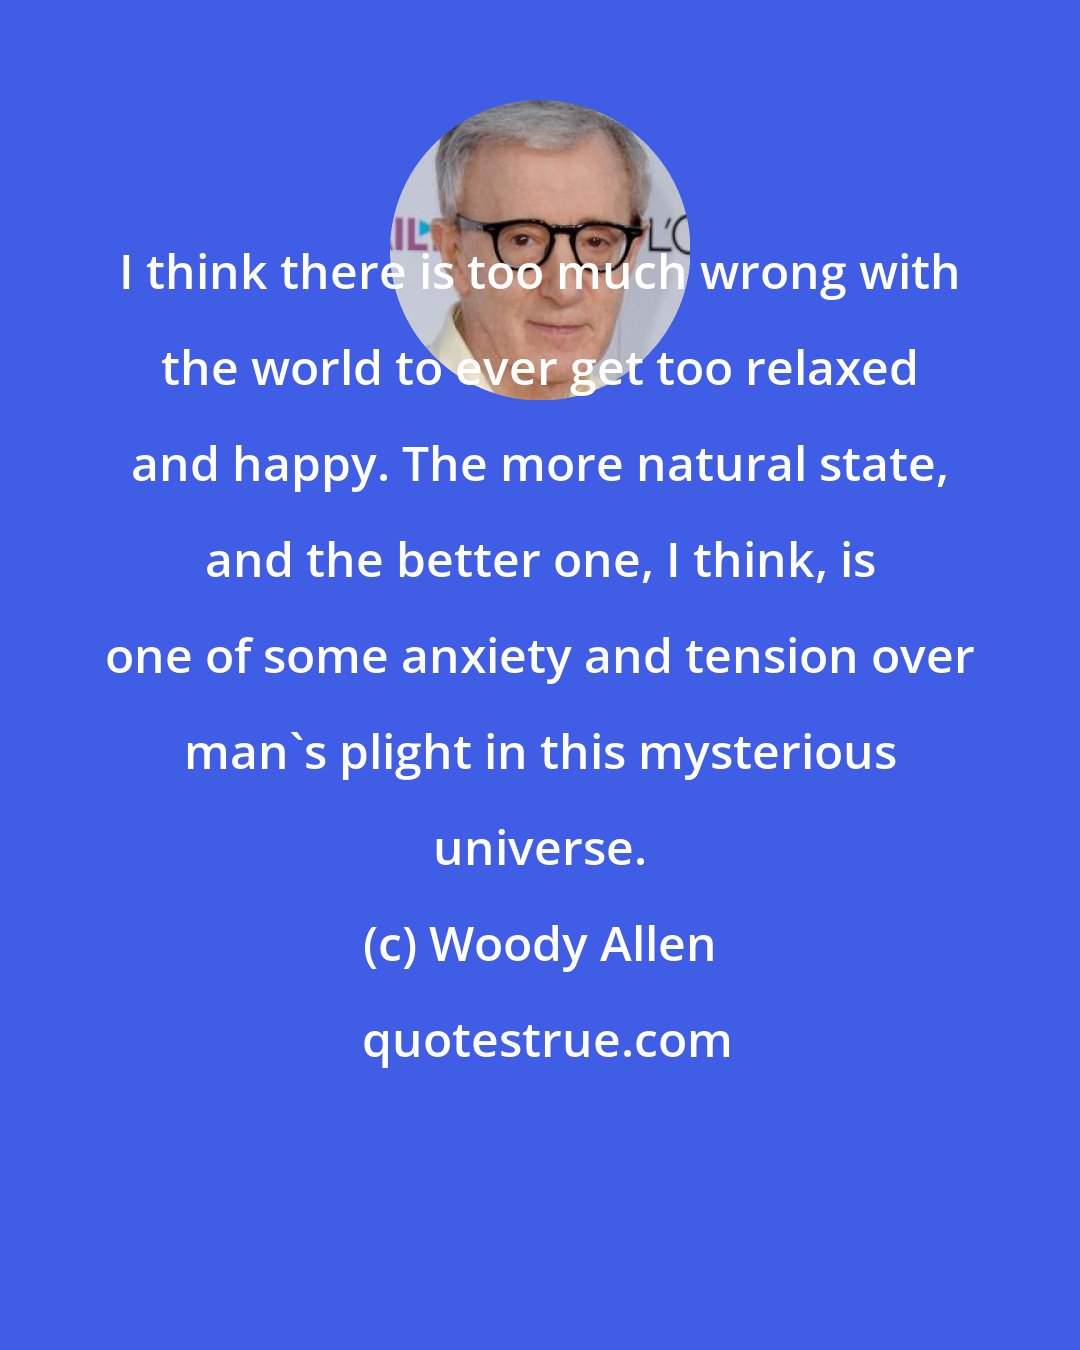 Woody Allen: I think there is too much wrong with the world to ever get too relaxed and happy. The more natural state, and the better one, I think, is one of some anxiety and tension over man's plight in this mysterious universe.